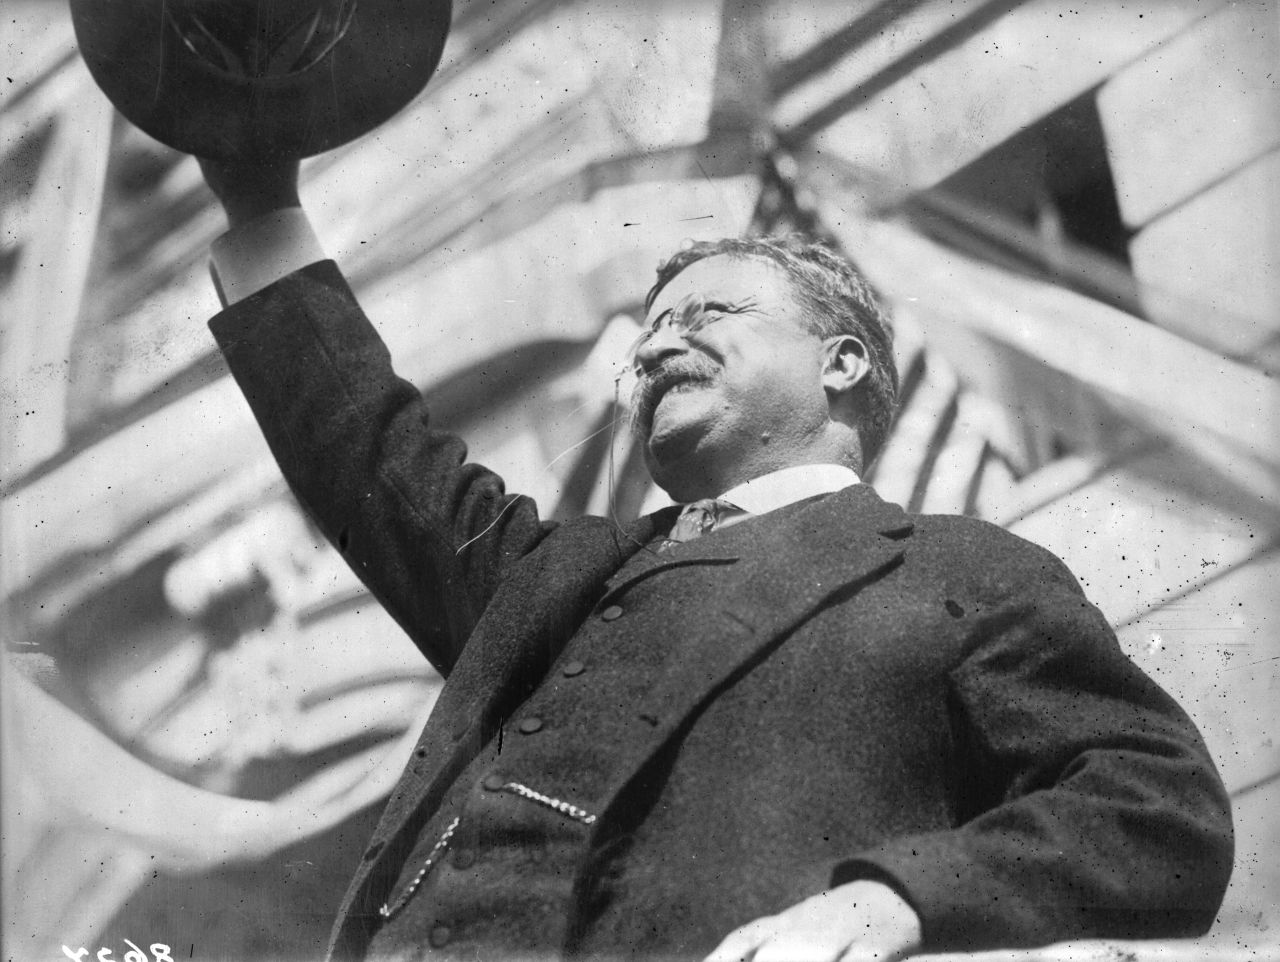 Former U.S. President Theodore Roosevelt was recognized for brokering peace between Russia and Japan.